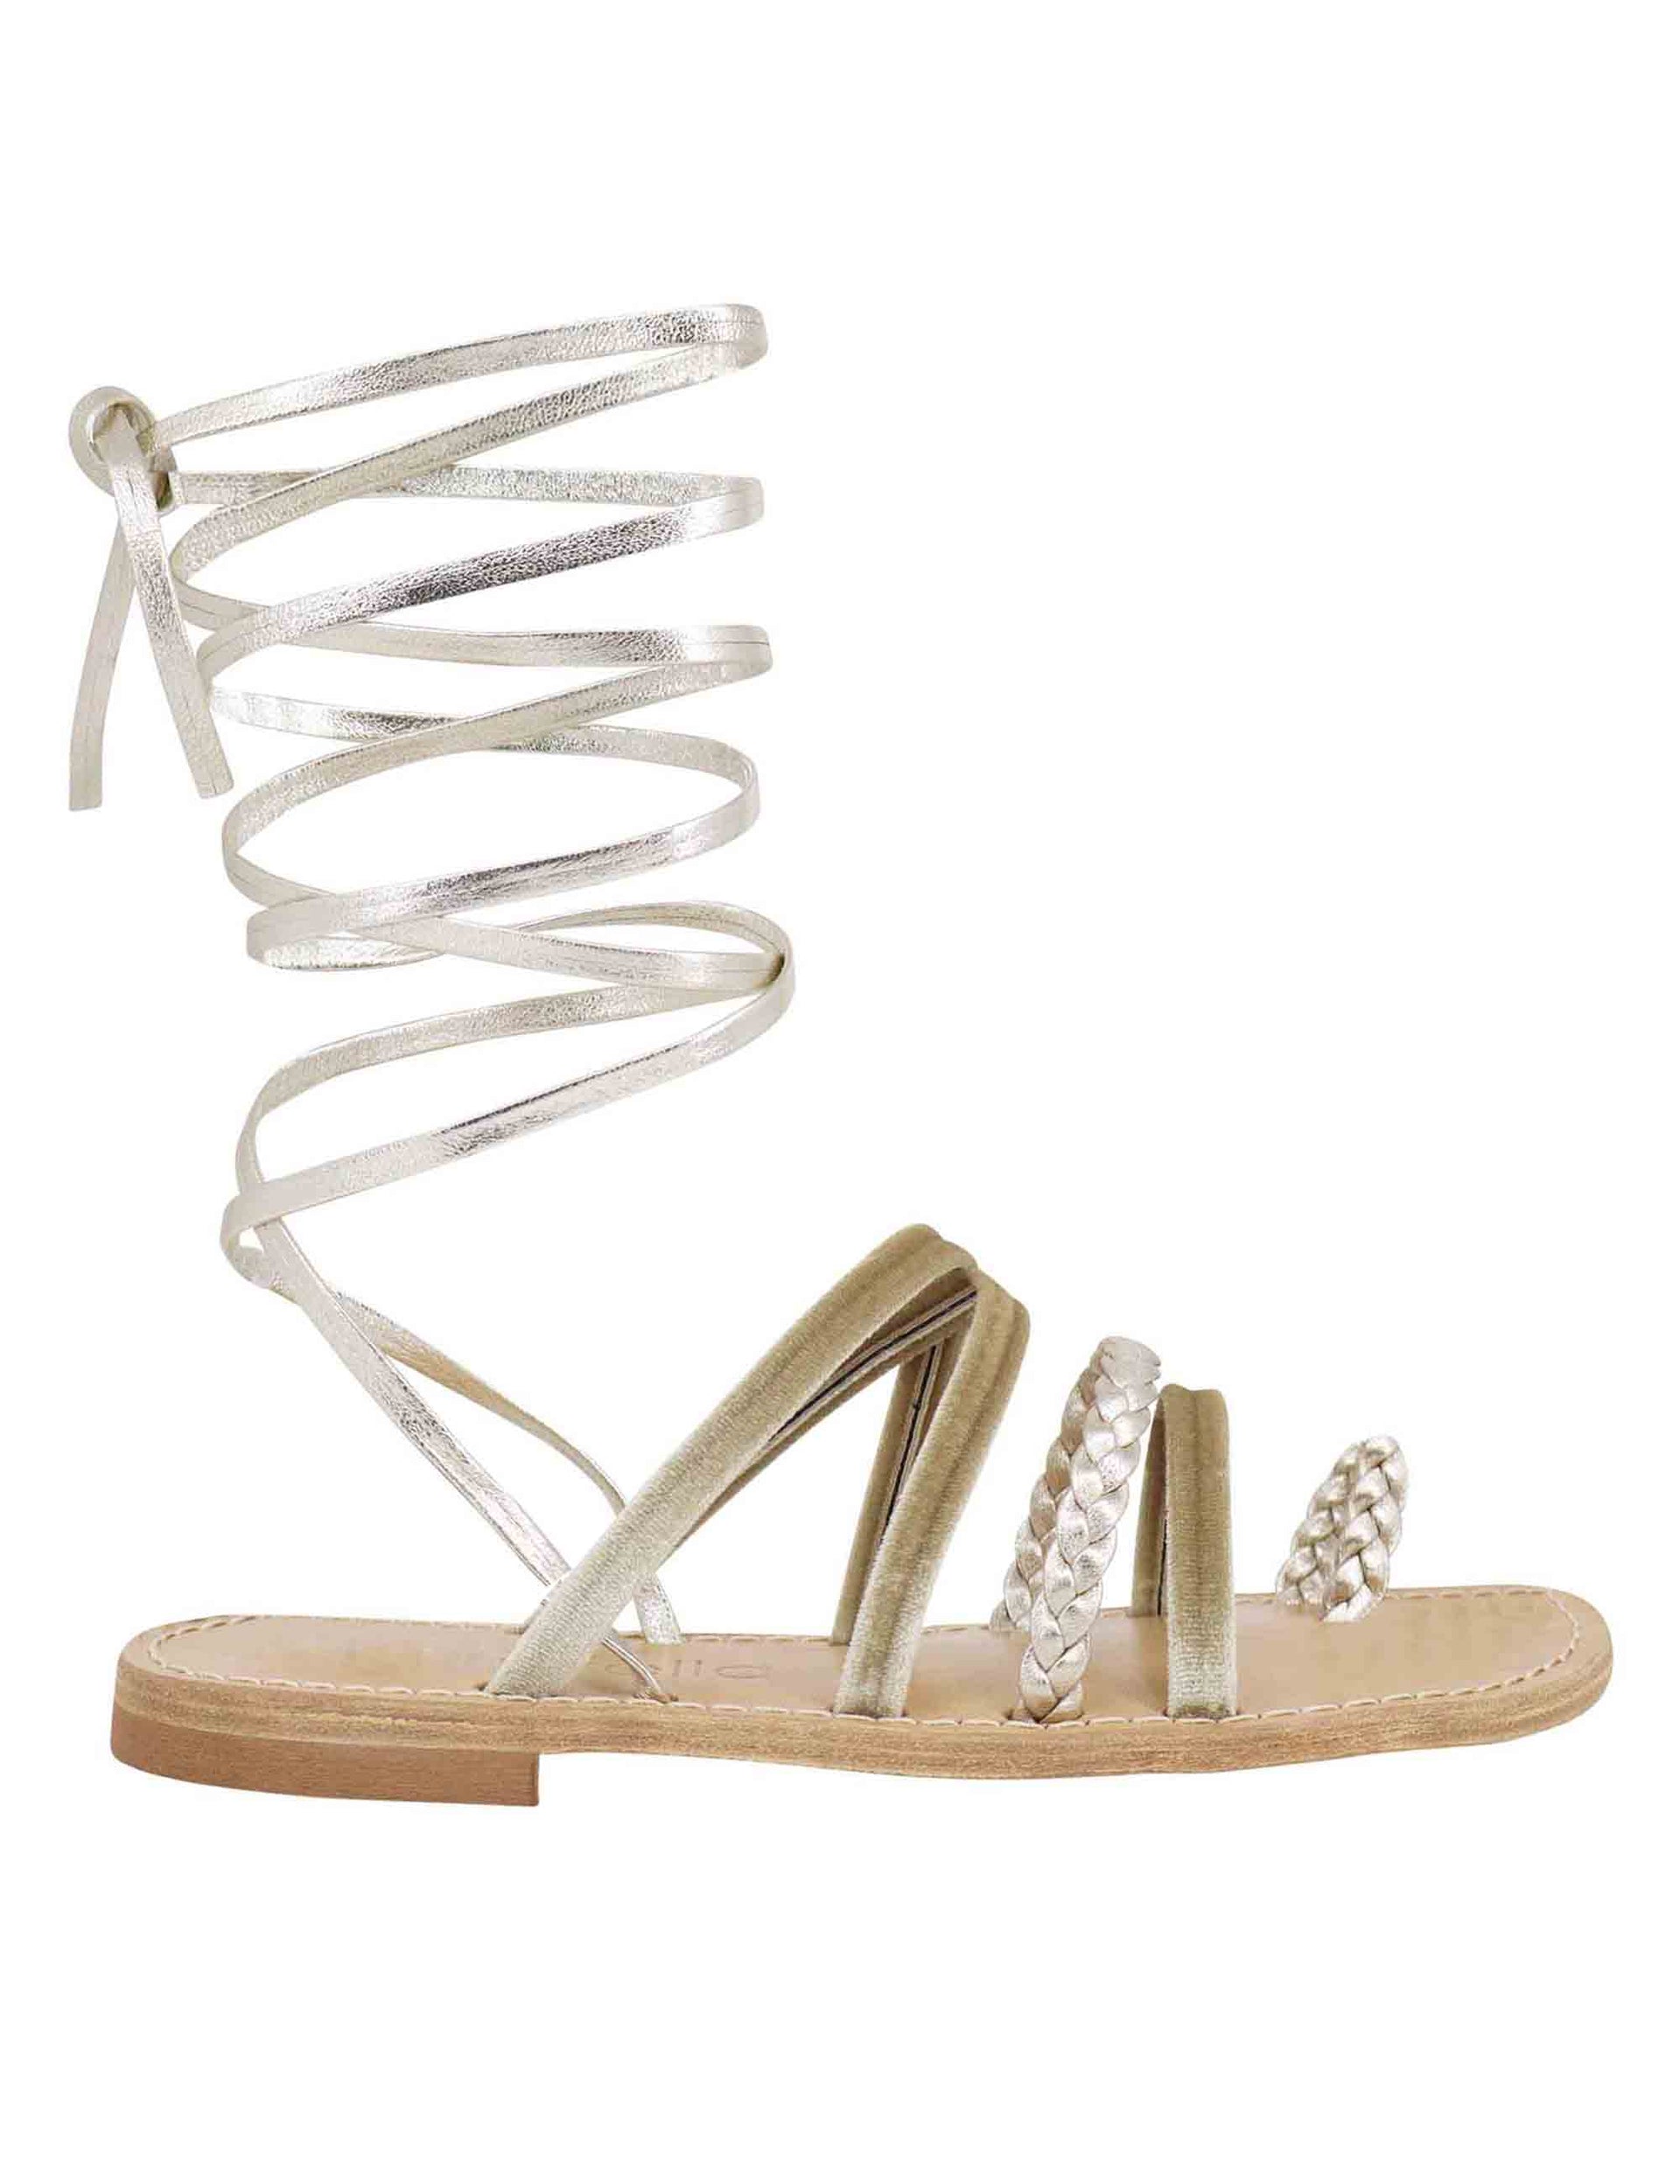 Women's flat sandals in silver woven leather with ankle straps